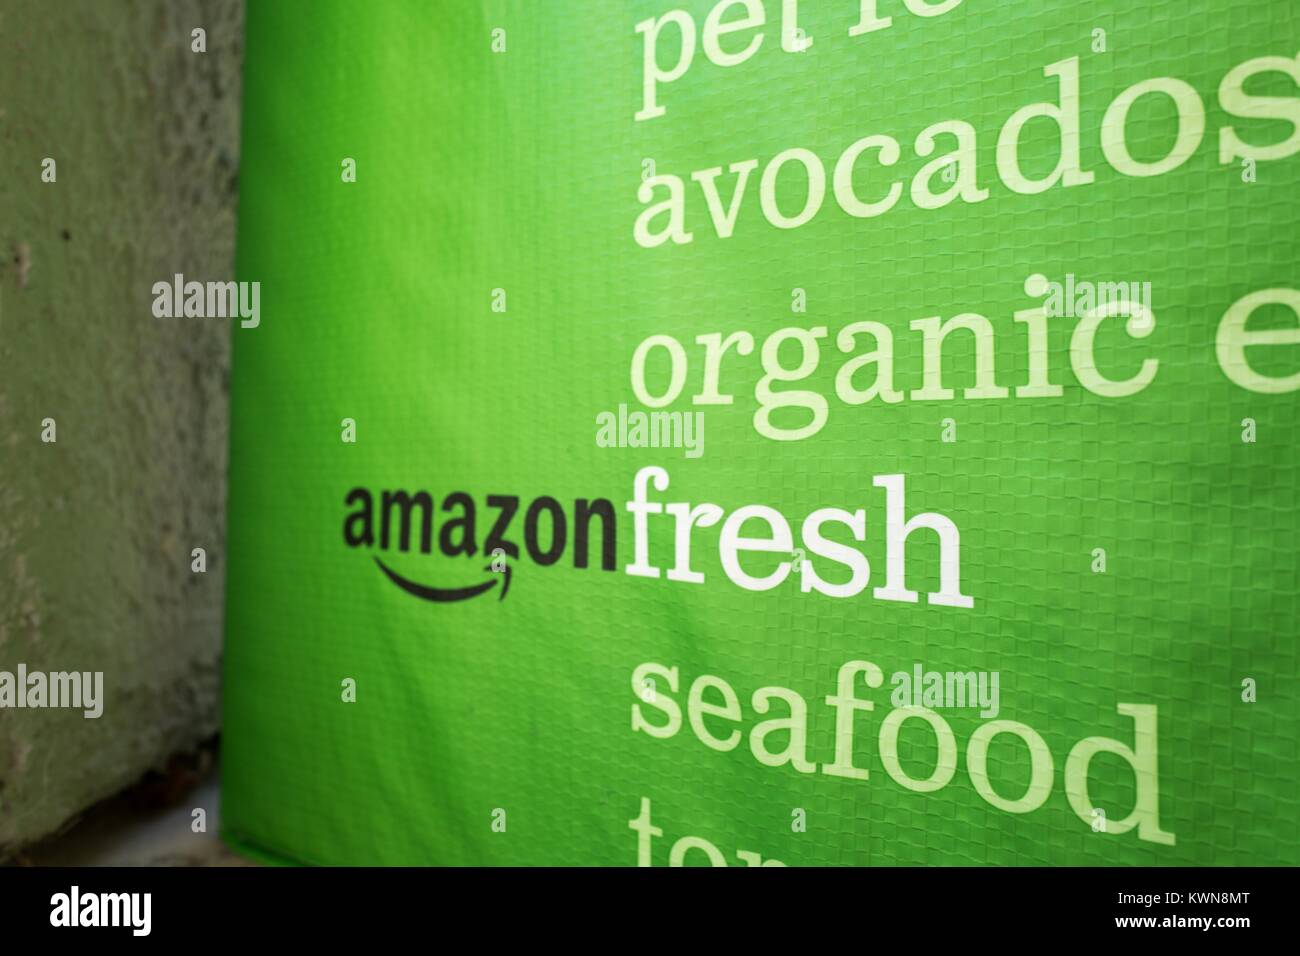 Green cold pack tote for Amazon Fresh grocery delivery service, with Amazon logo and text listing groceries which may be ordered using the service, on the doorstep of a suburban home in the San Francisco Bay Area town of San Ramon, California, July 26, 2017. In June of 2017, Amazon announced that it would acquire the upscale grocery chain Whole Foods Market to expand its offerings in the grocery industry. Stock Photo